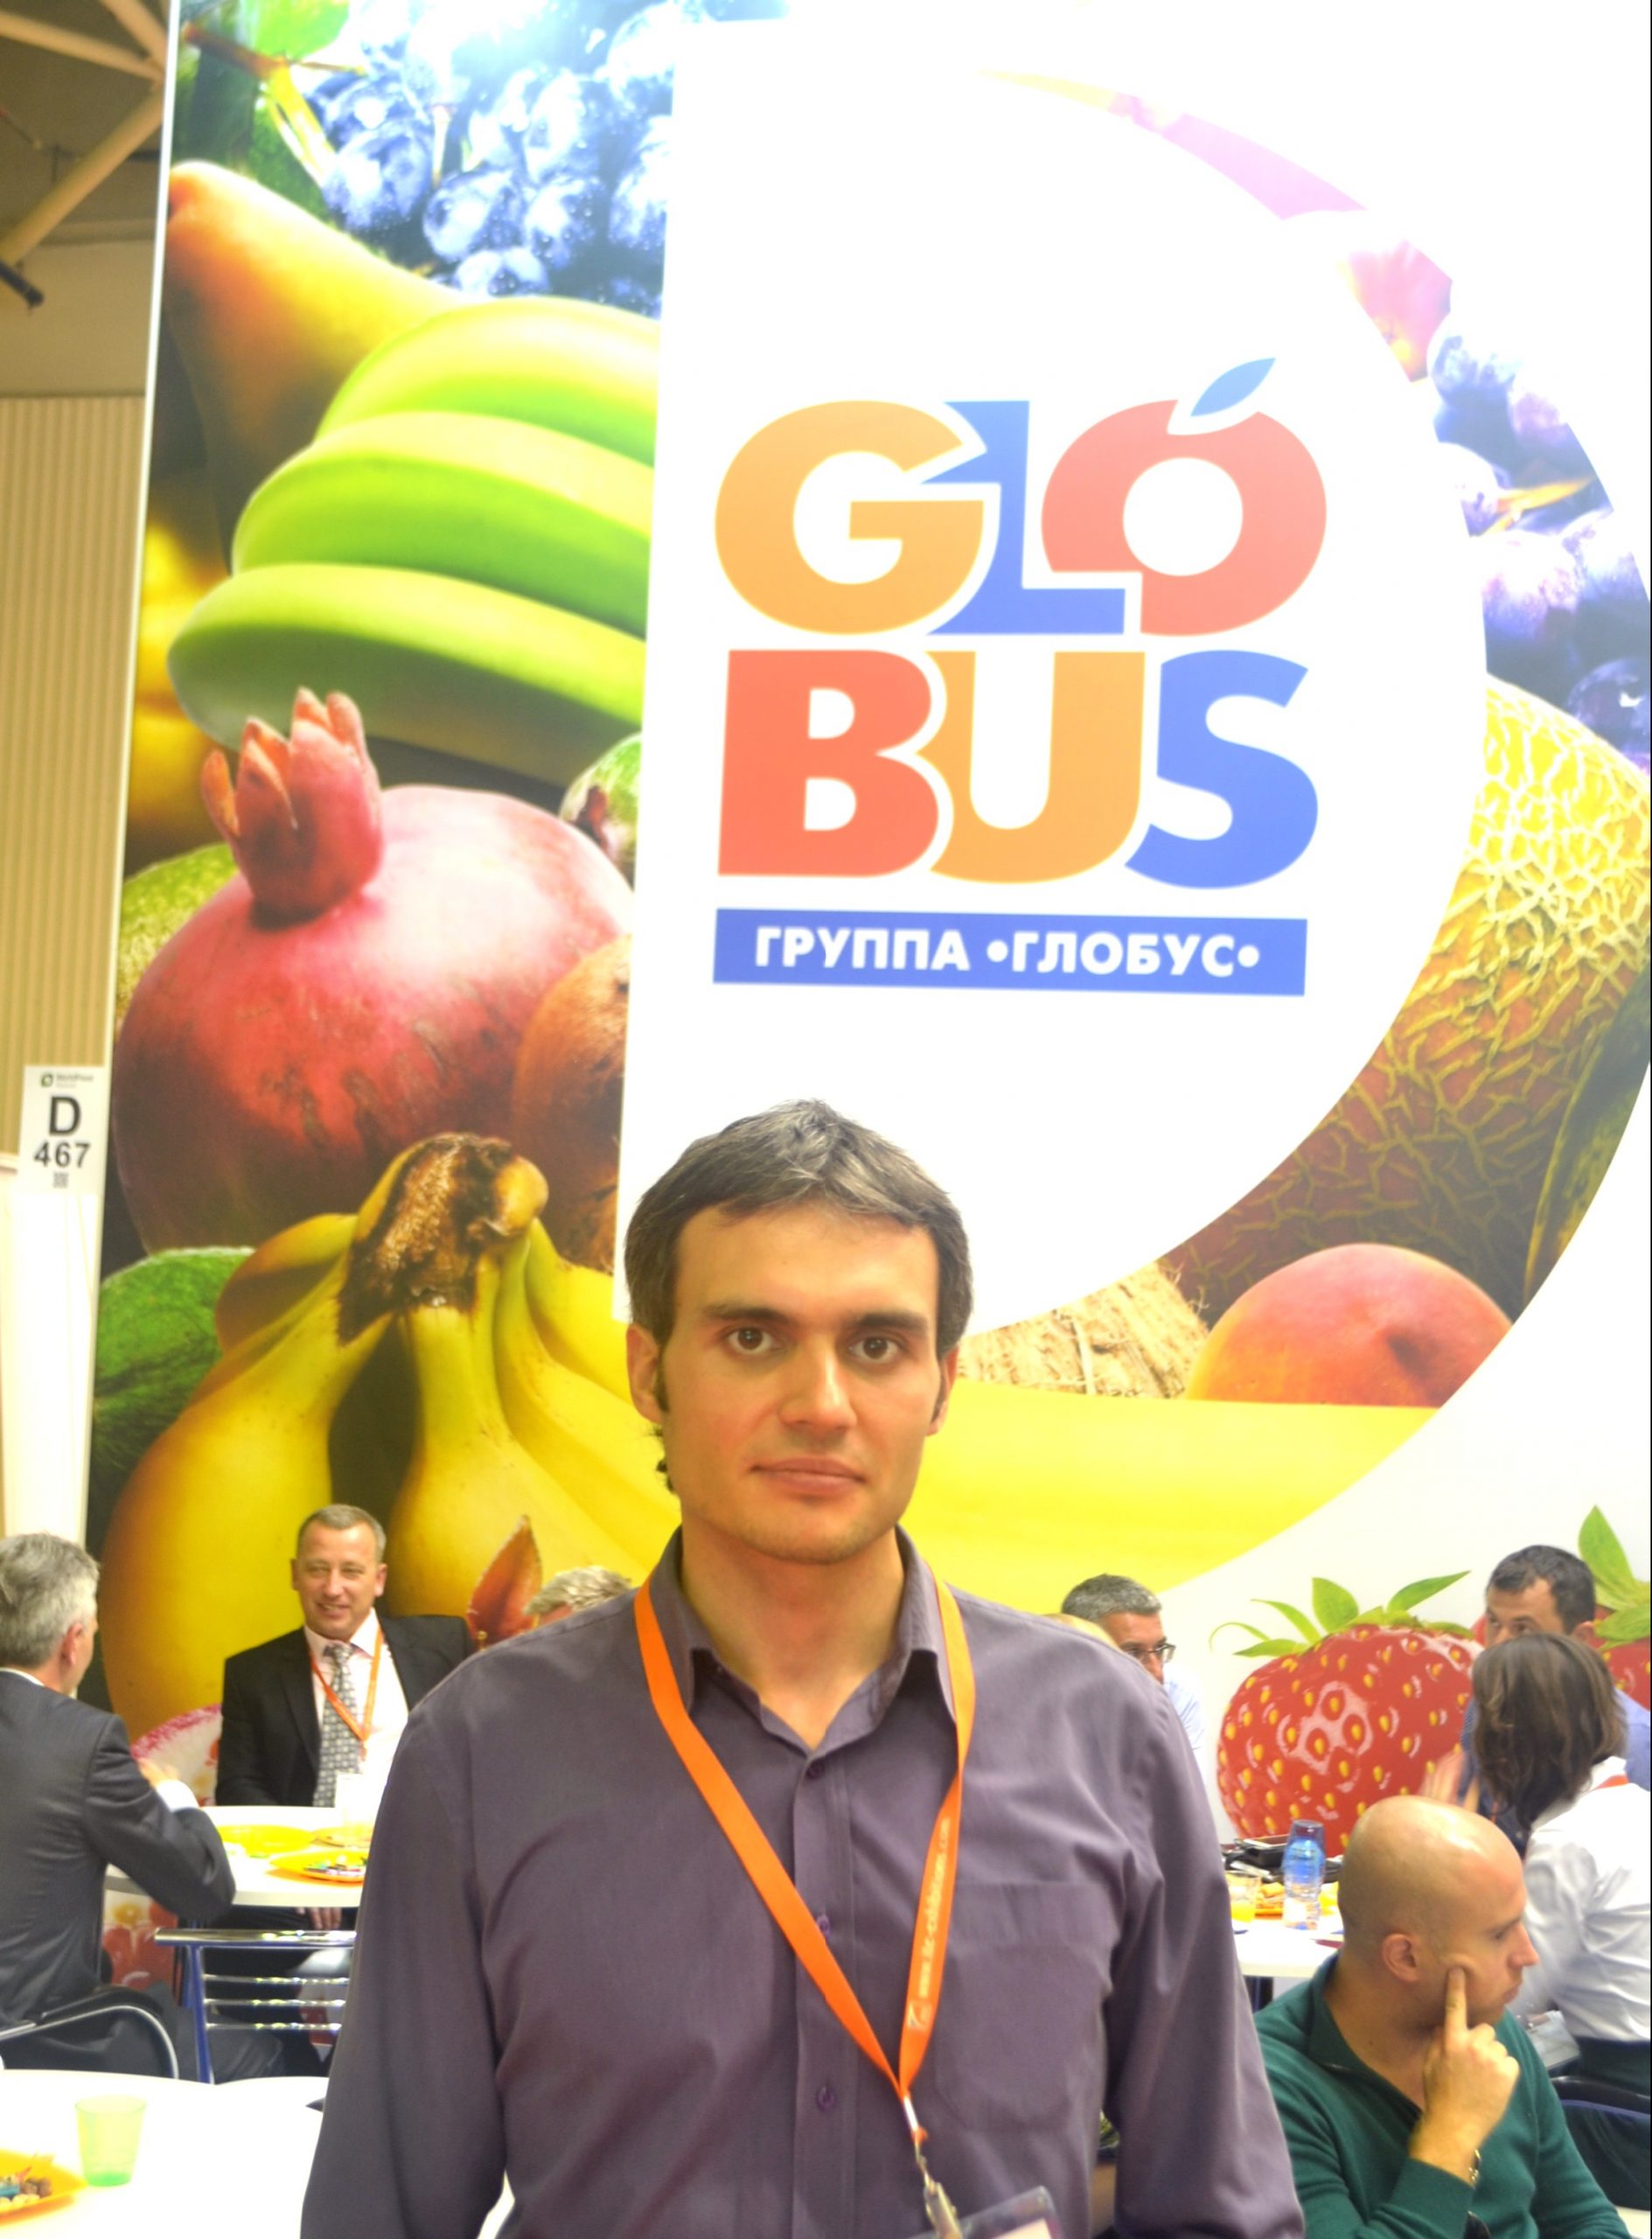 The past summer was rather unpredictable for fruit sales, and citrus fruit in particular, reports Peter Komarov, import manager from Globus Group, one of the largest Russian fruit importers.